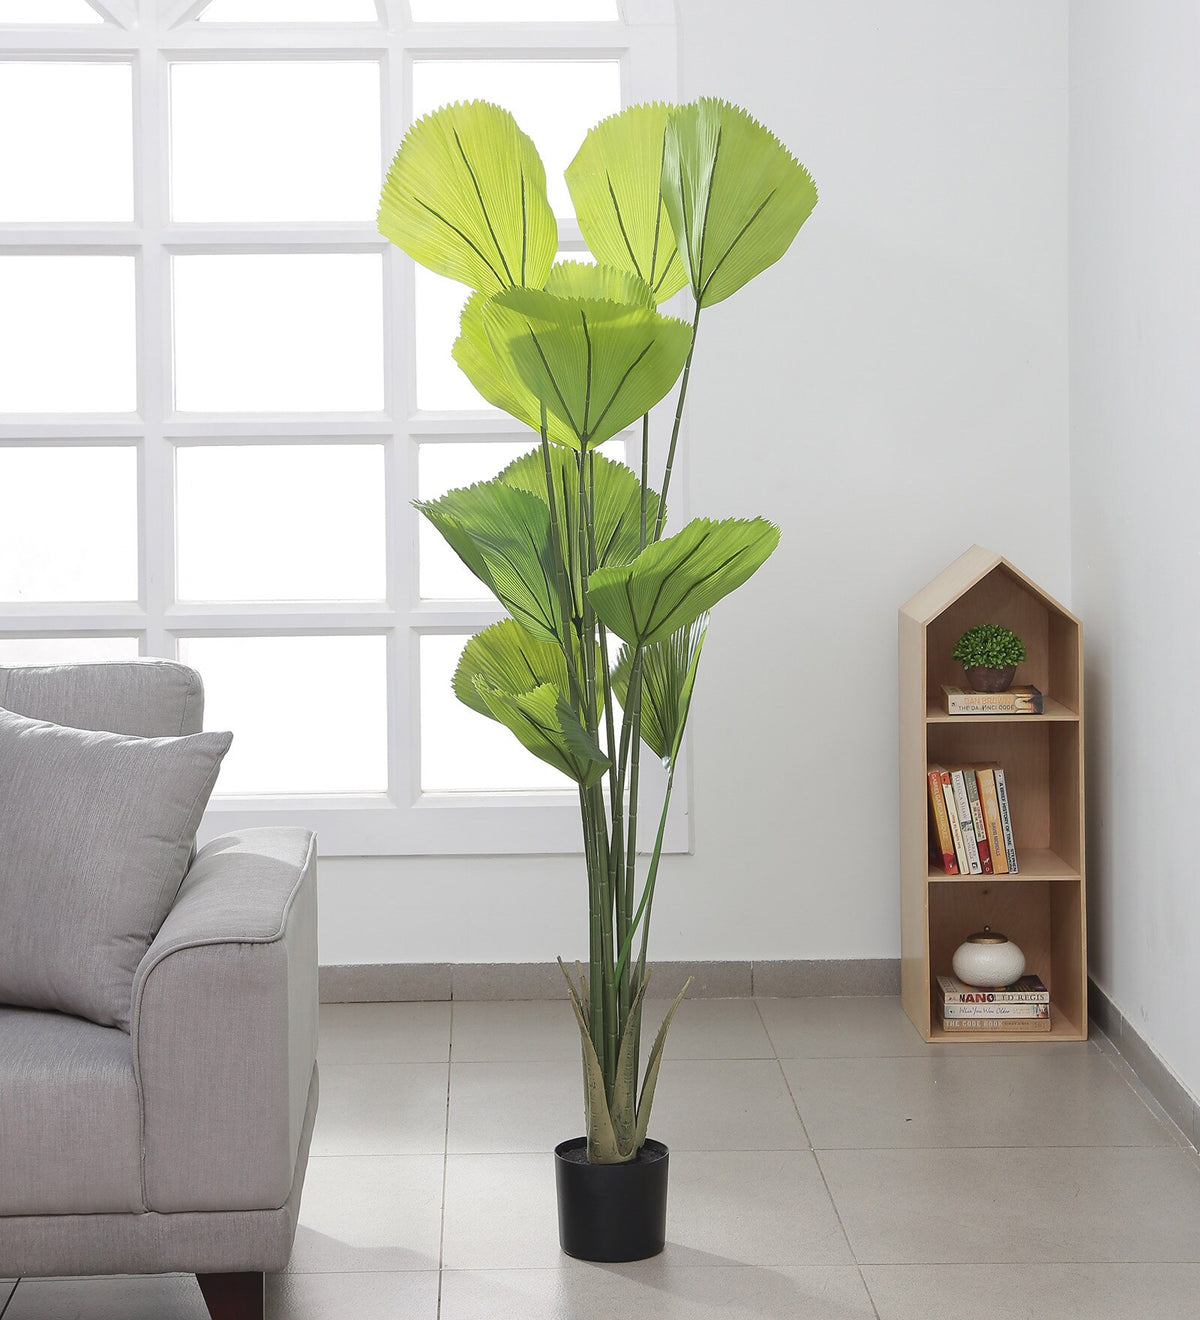 Artificial Real Touch Fan Plam Plants Tree for Home Decoration Living Room Office Big/Medium Size with Pot (170 cm Tall, Green)